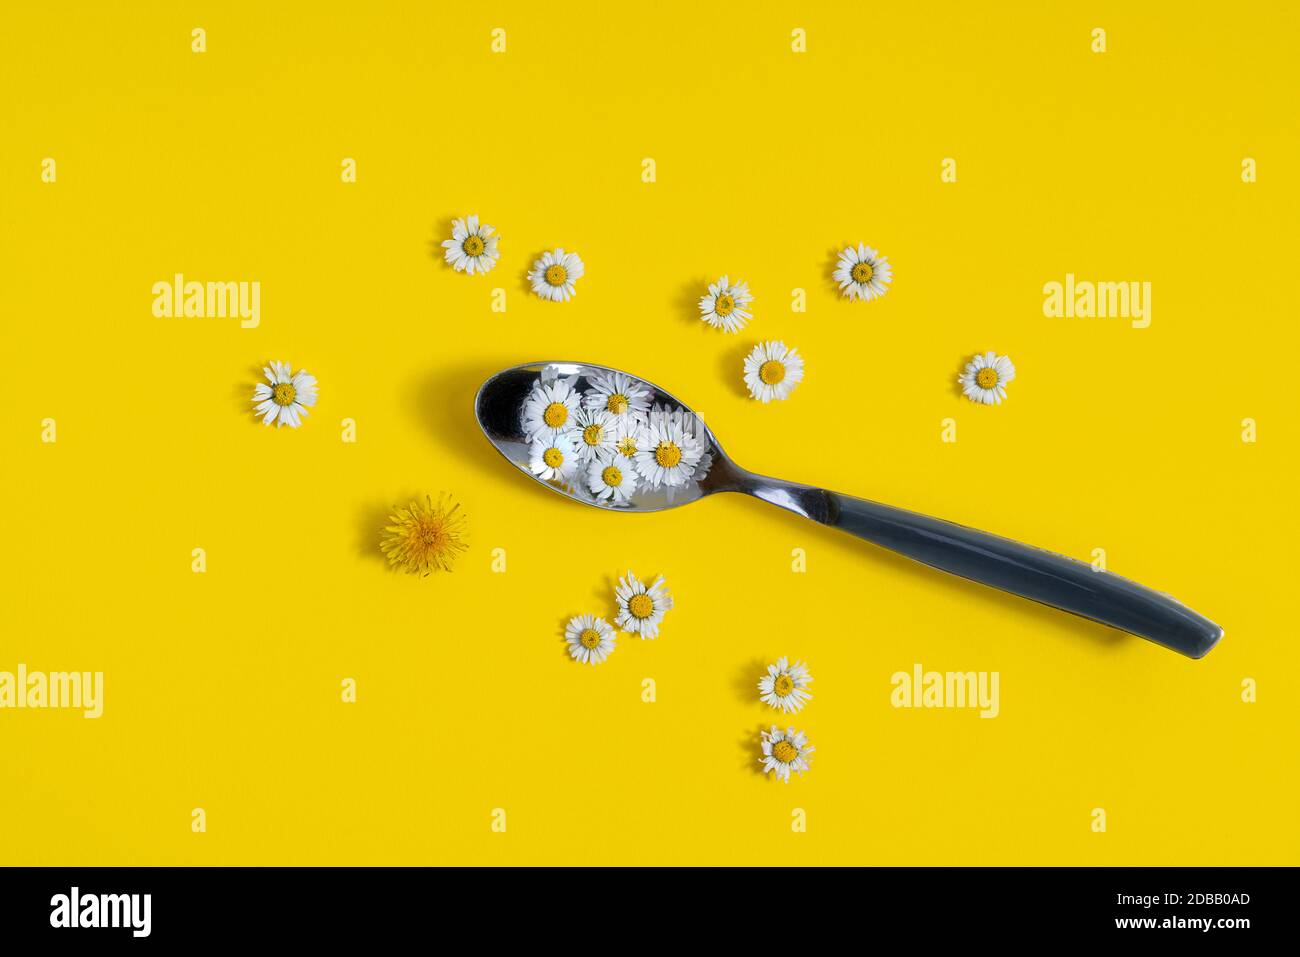 some daisies in the spoon and scattered on a yellow surface Stock Photo